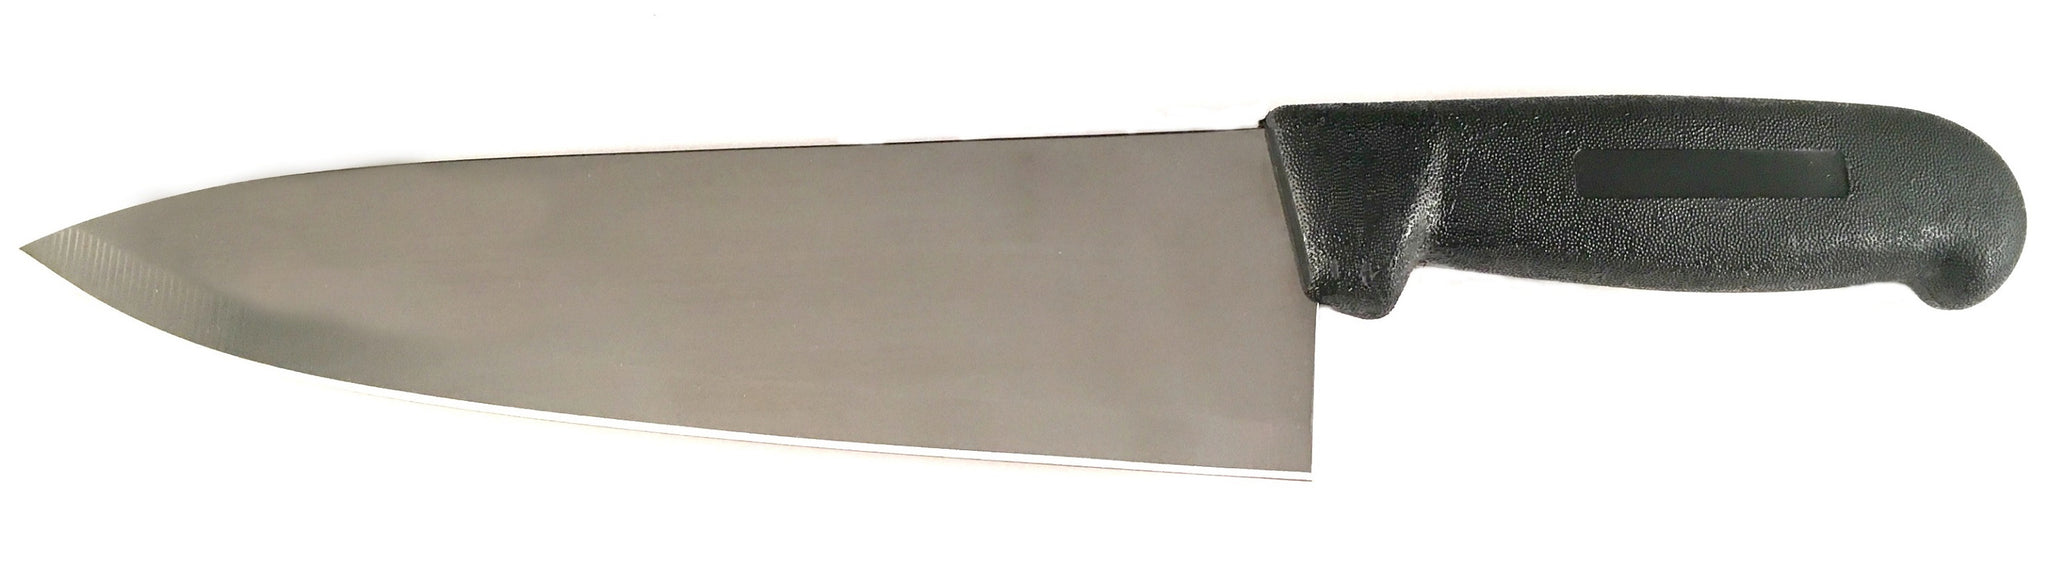 Commercial Chef 8'' Chef's Knife